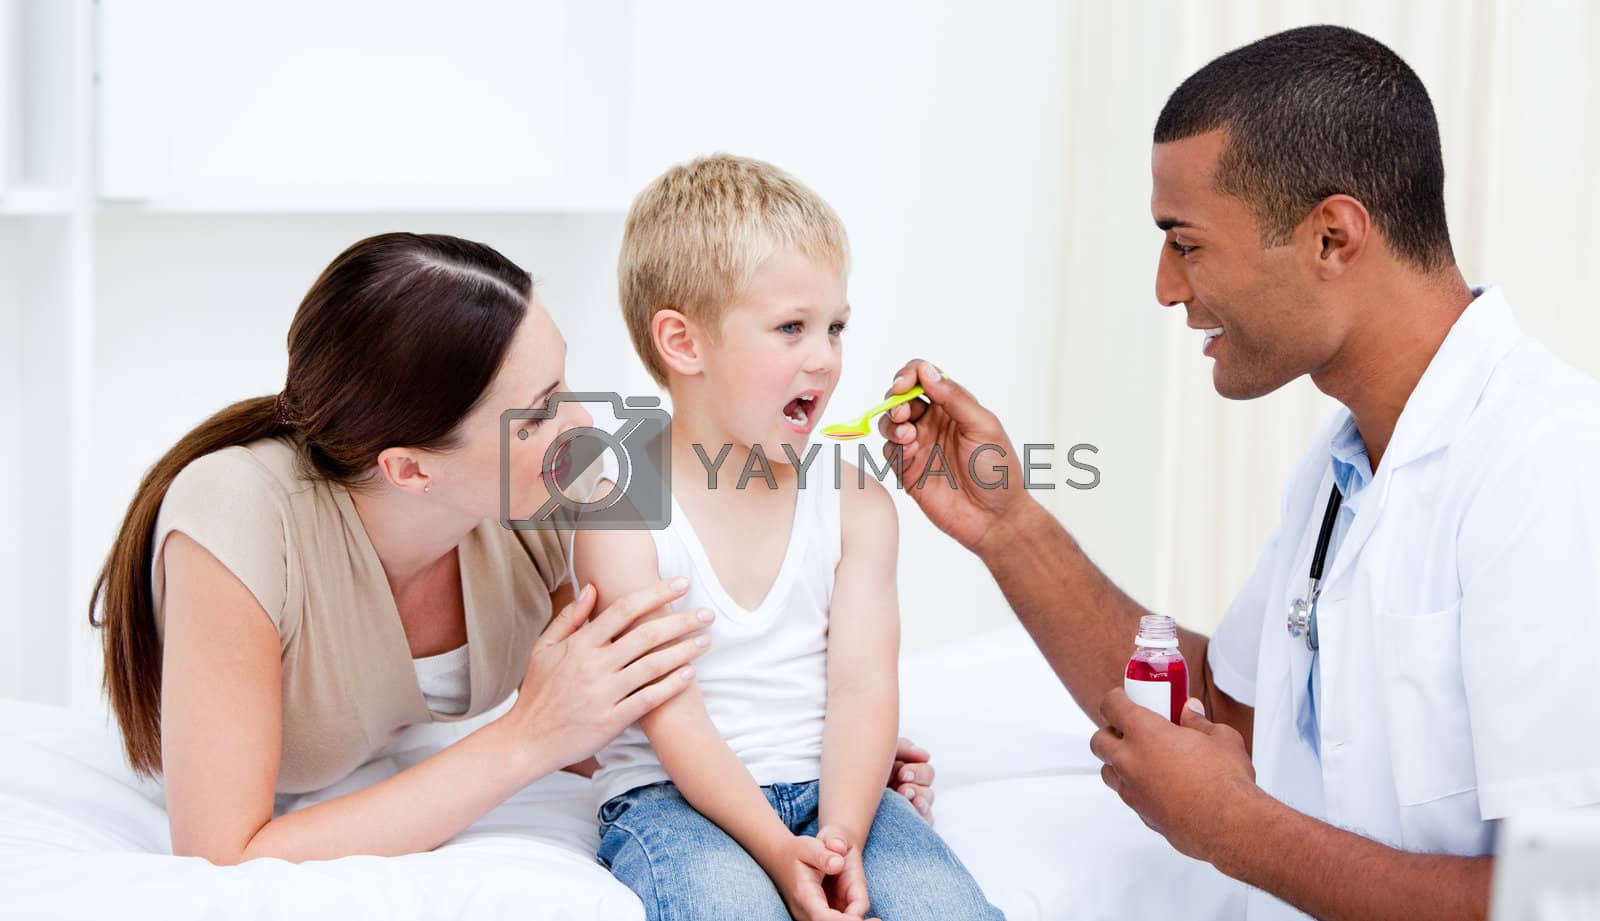 Royalty free image of Mixed-race doctor giving some syrup to the little boy  by Wavebreakmedia